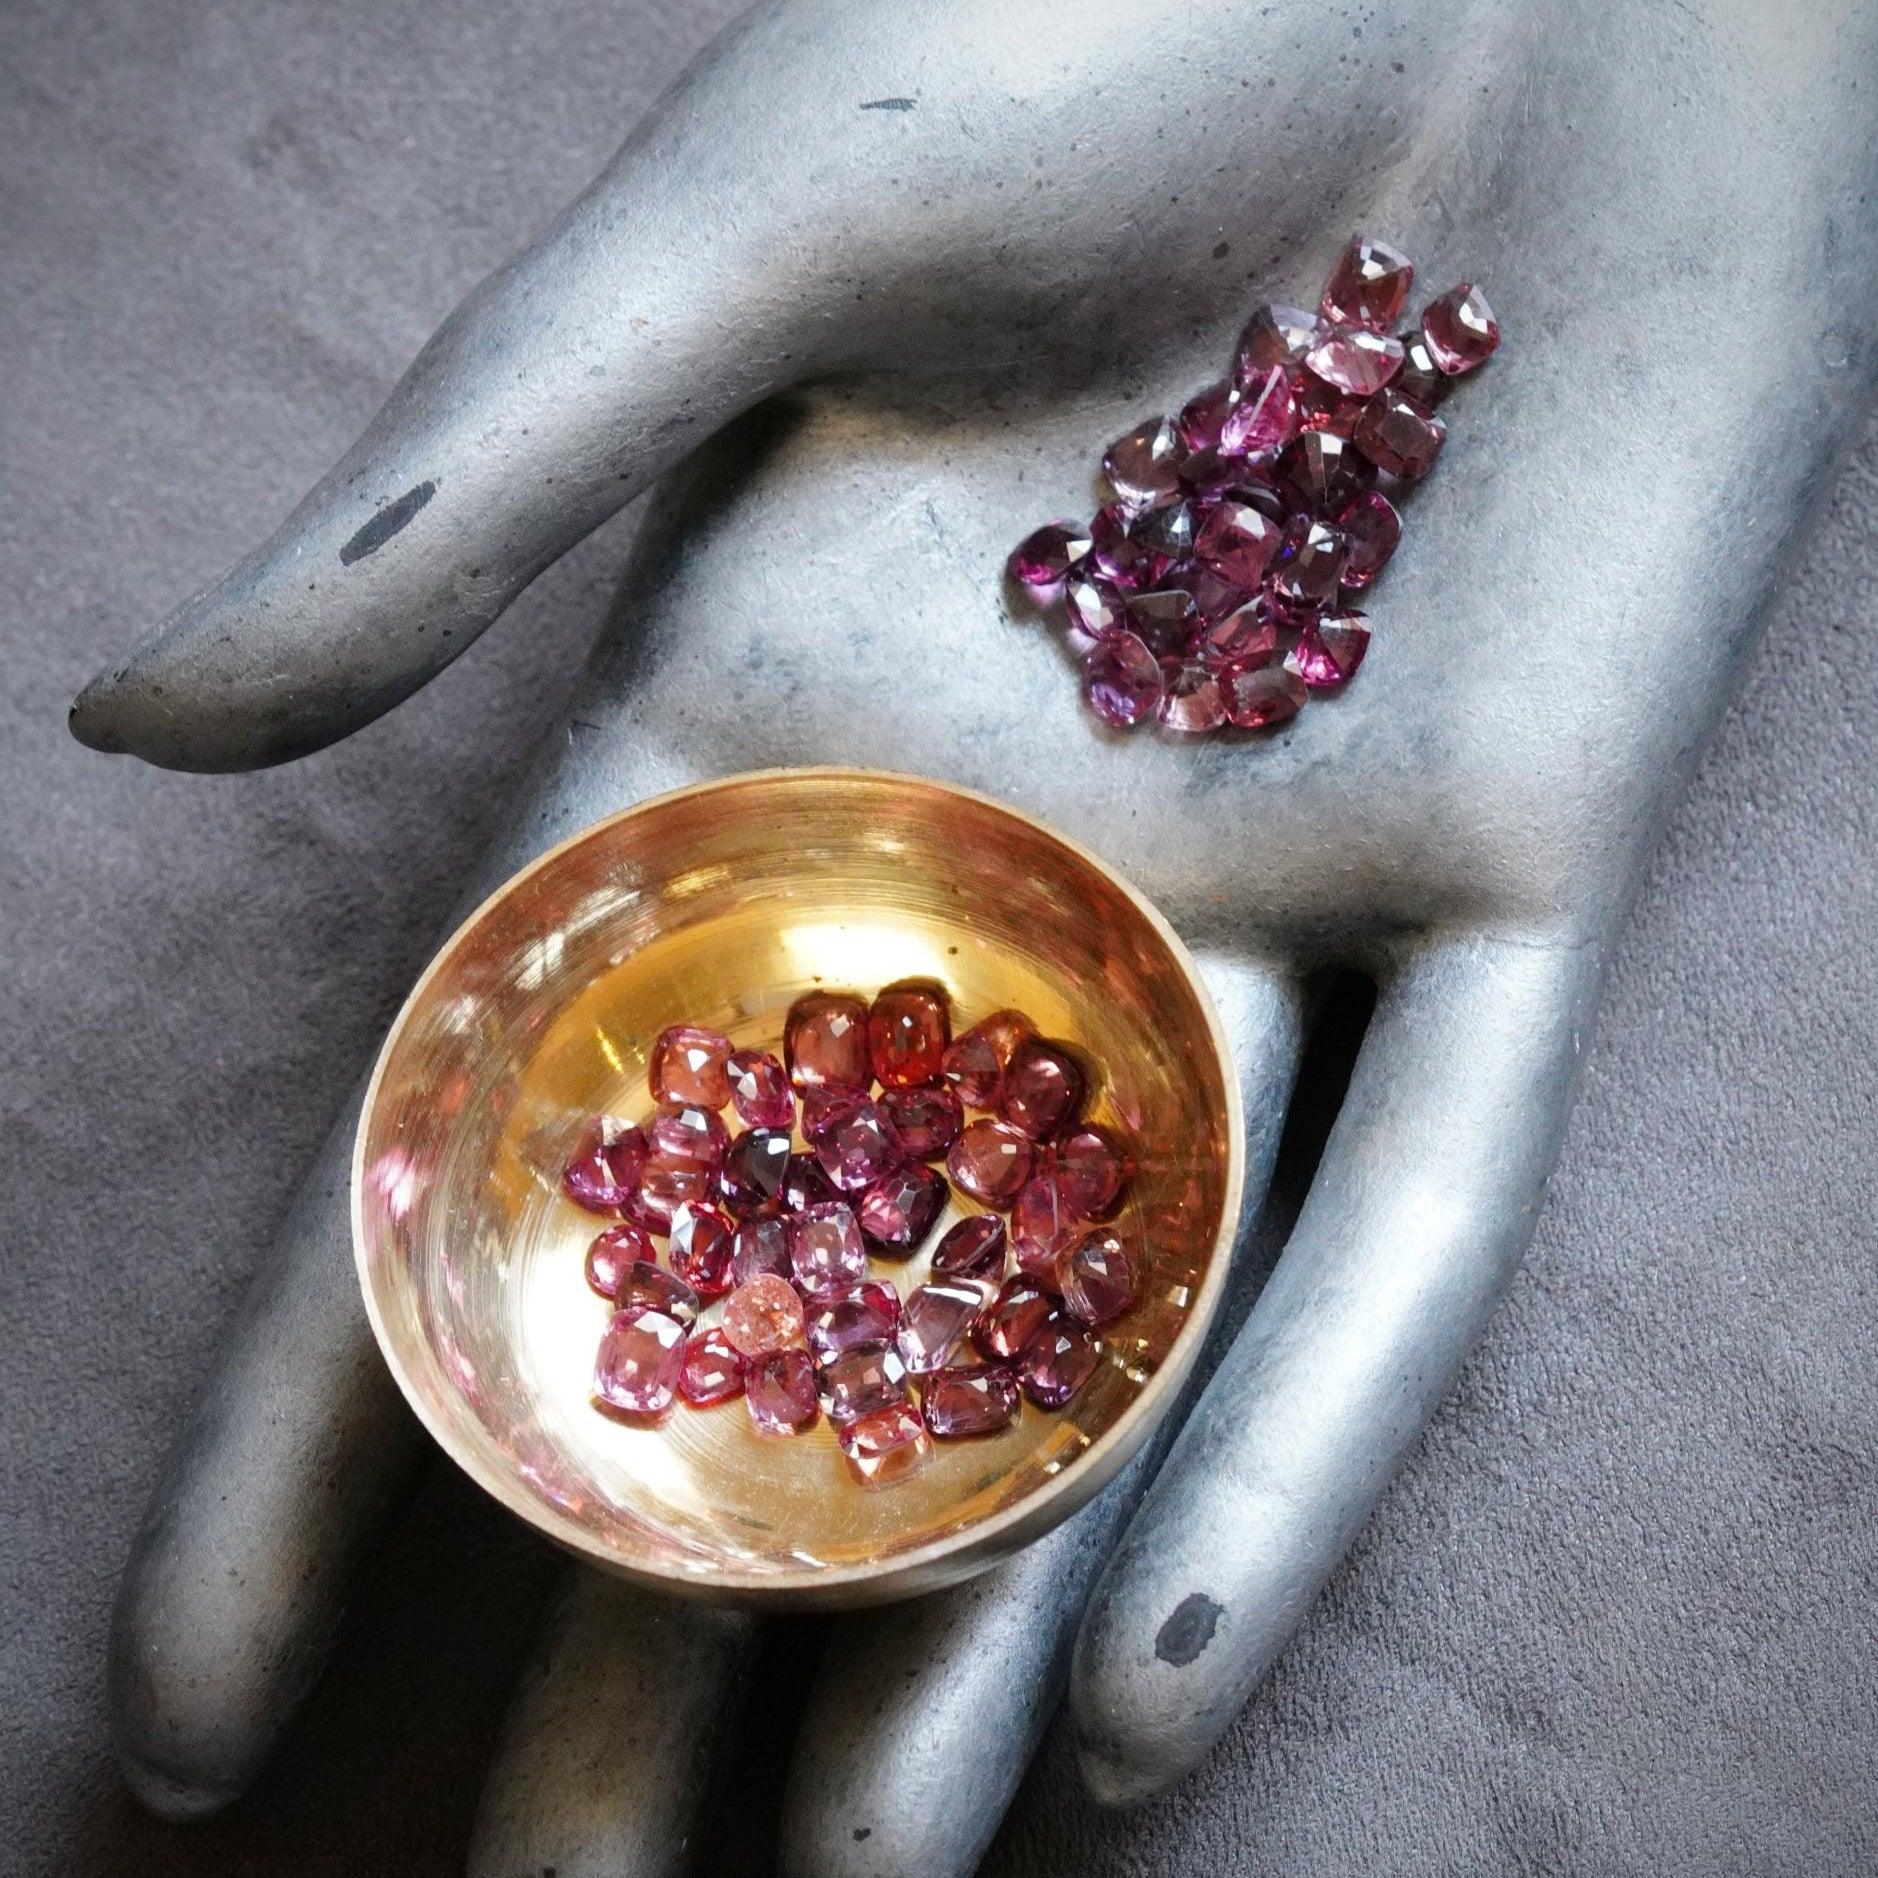 Captivating no heat spinels from the Jogani collection in mauve shades